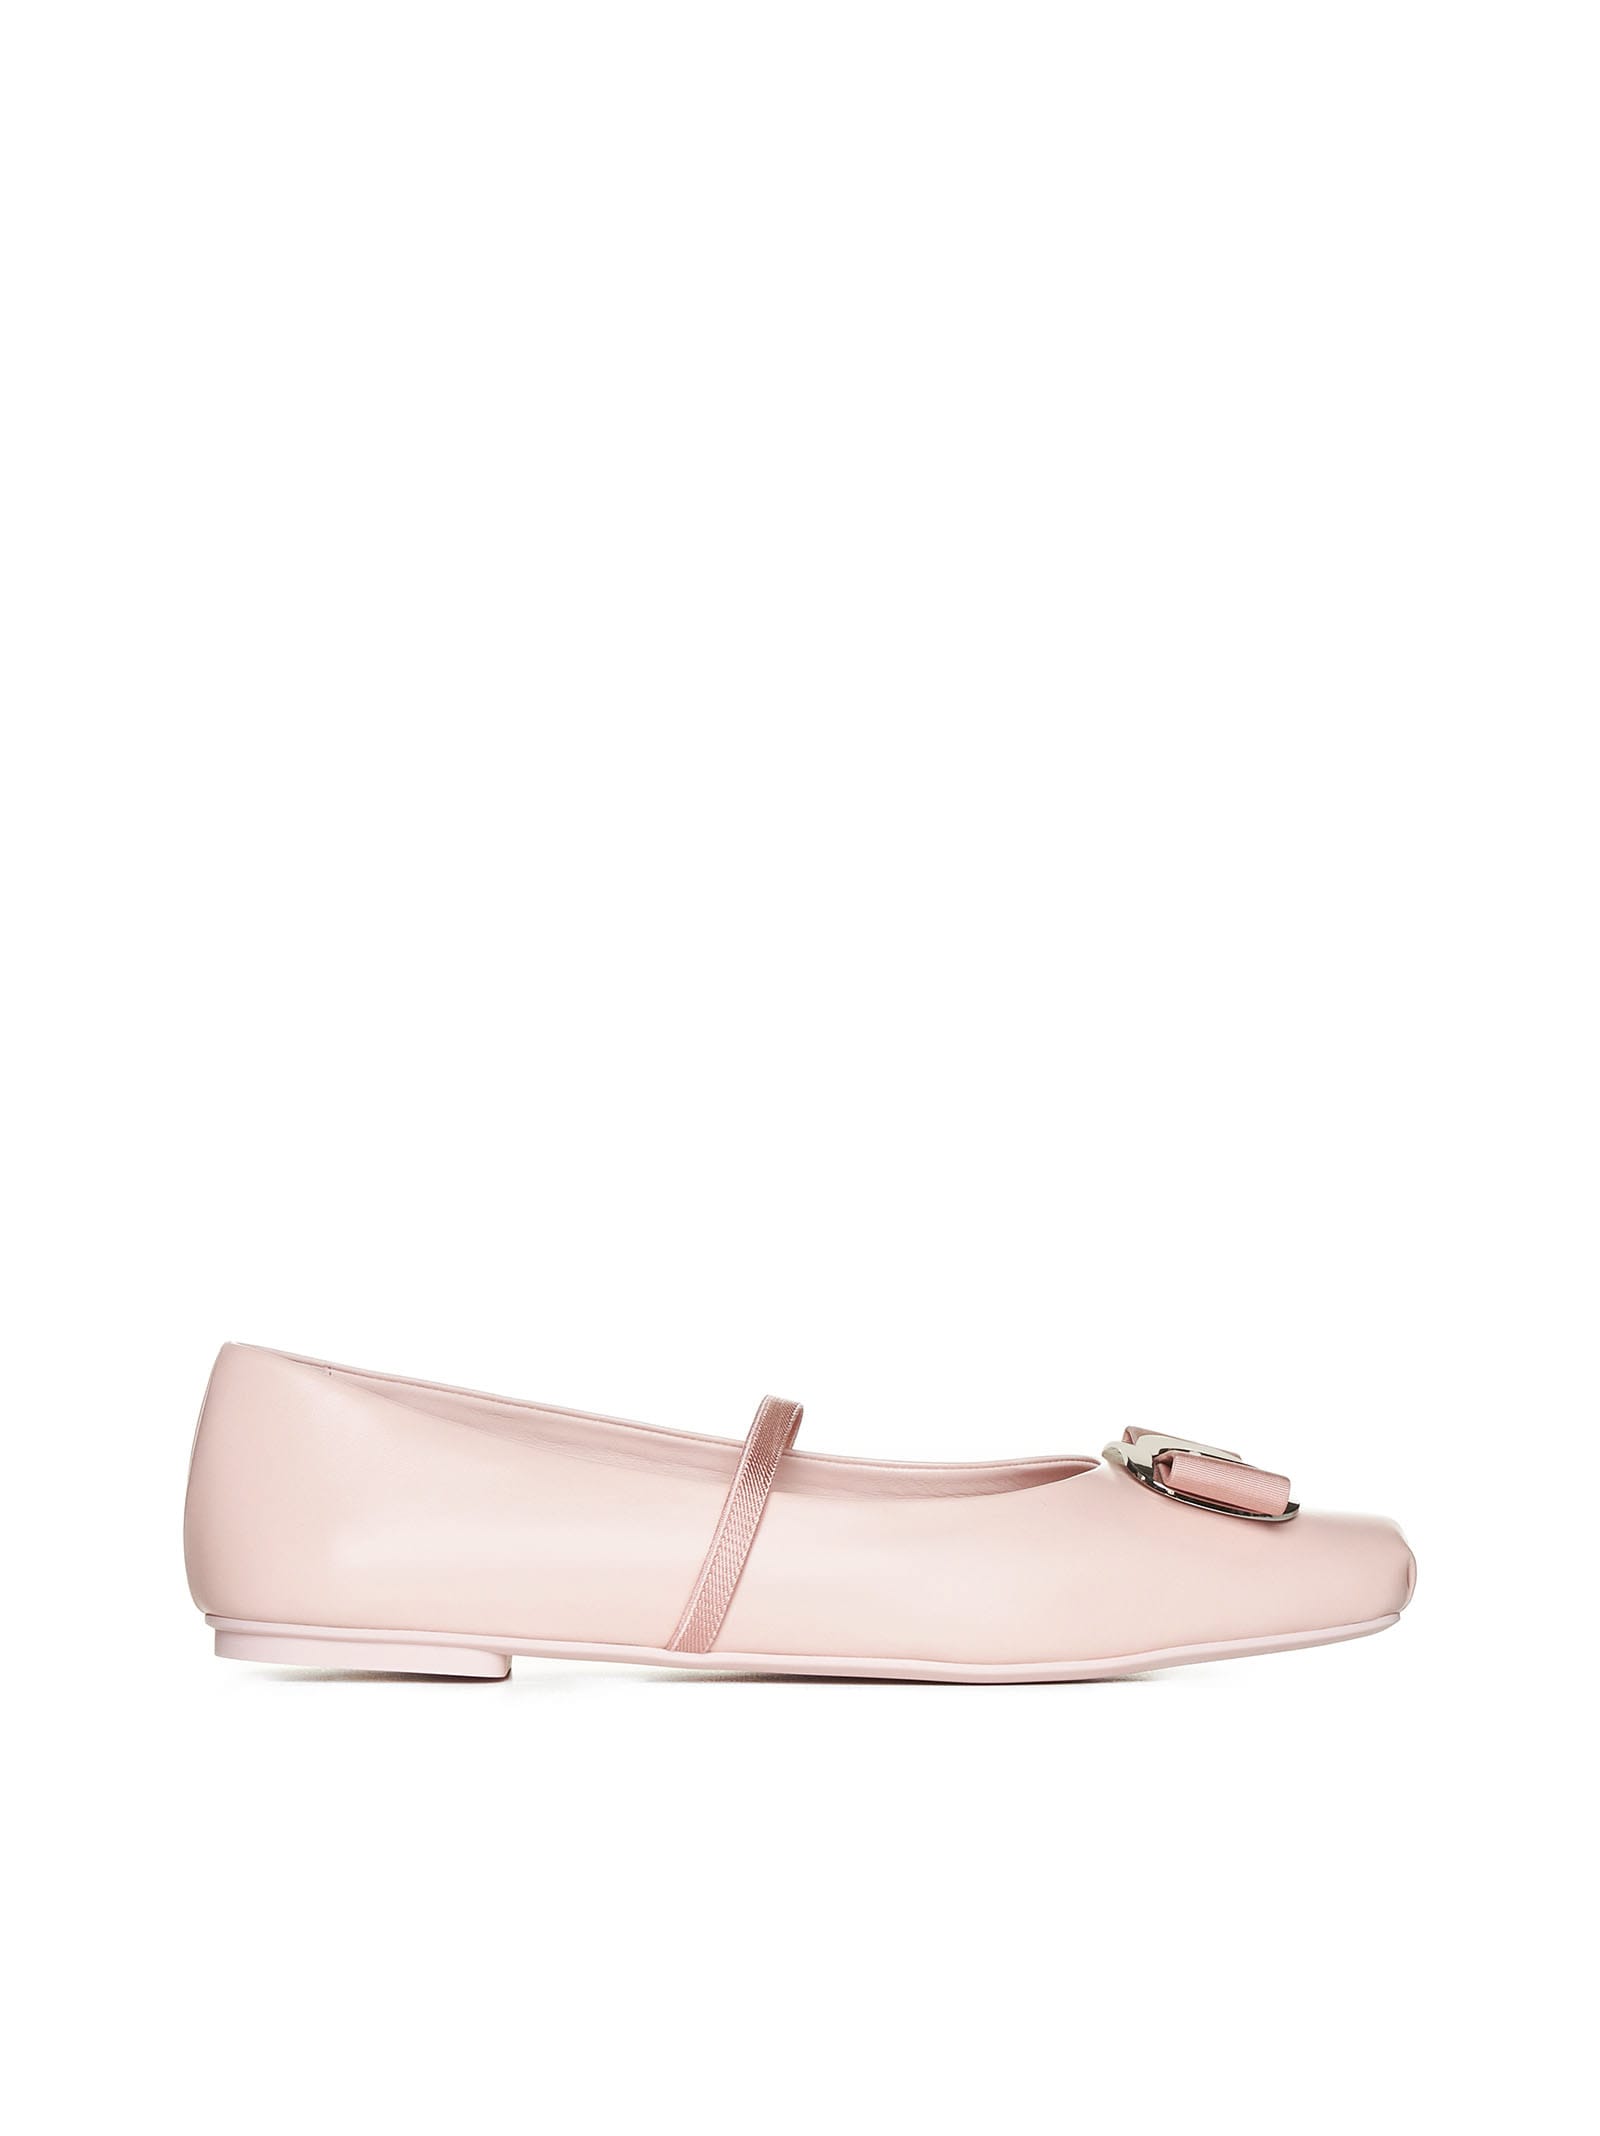 Shop Ferragamo Flat Shoes In Nylud Pink || Nylud Pink || Ny